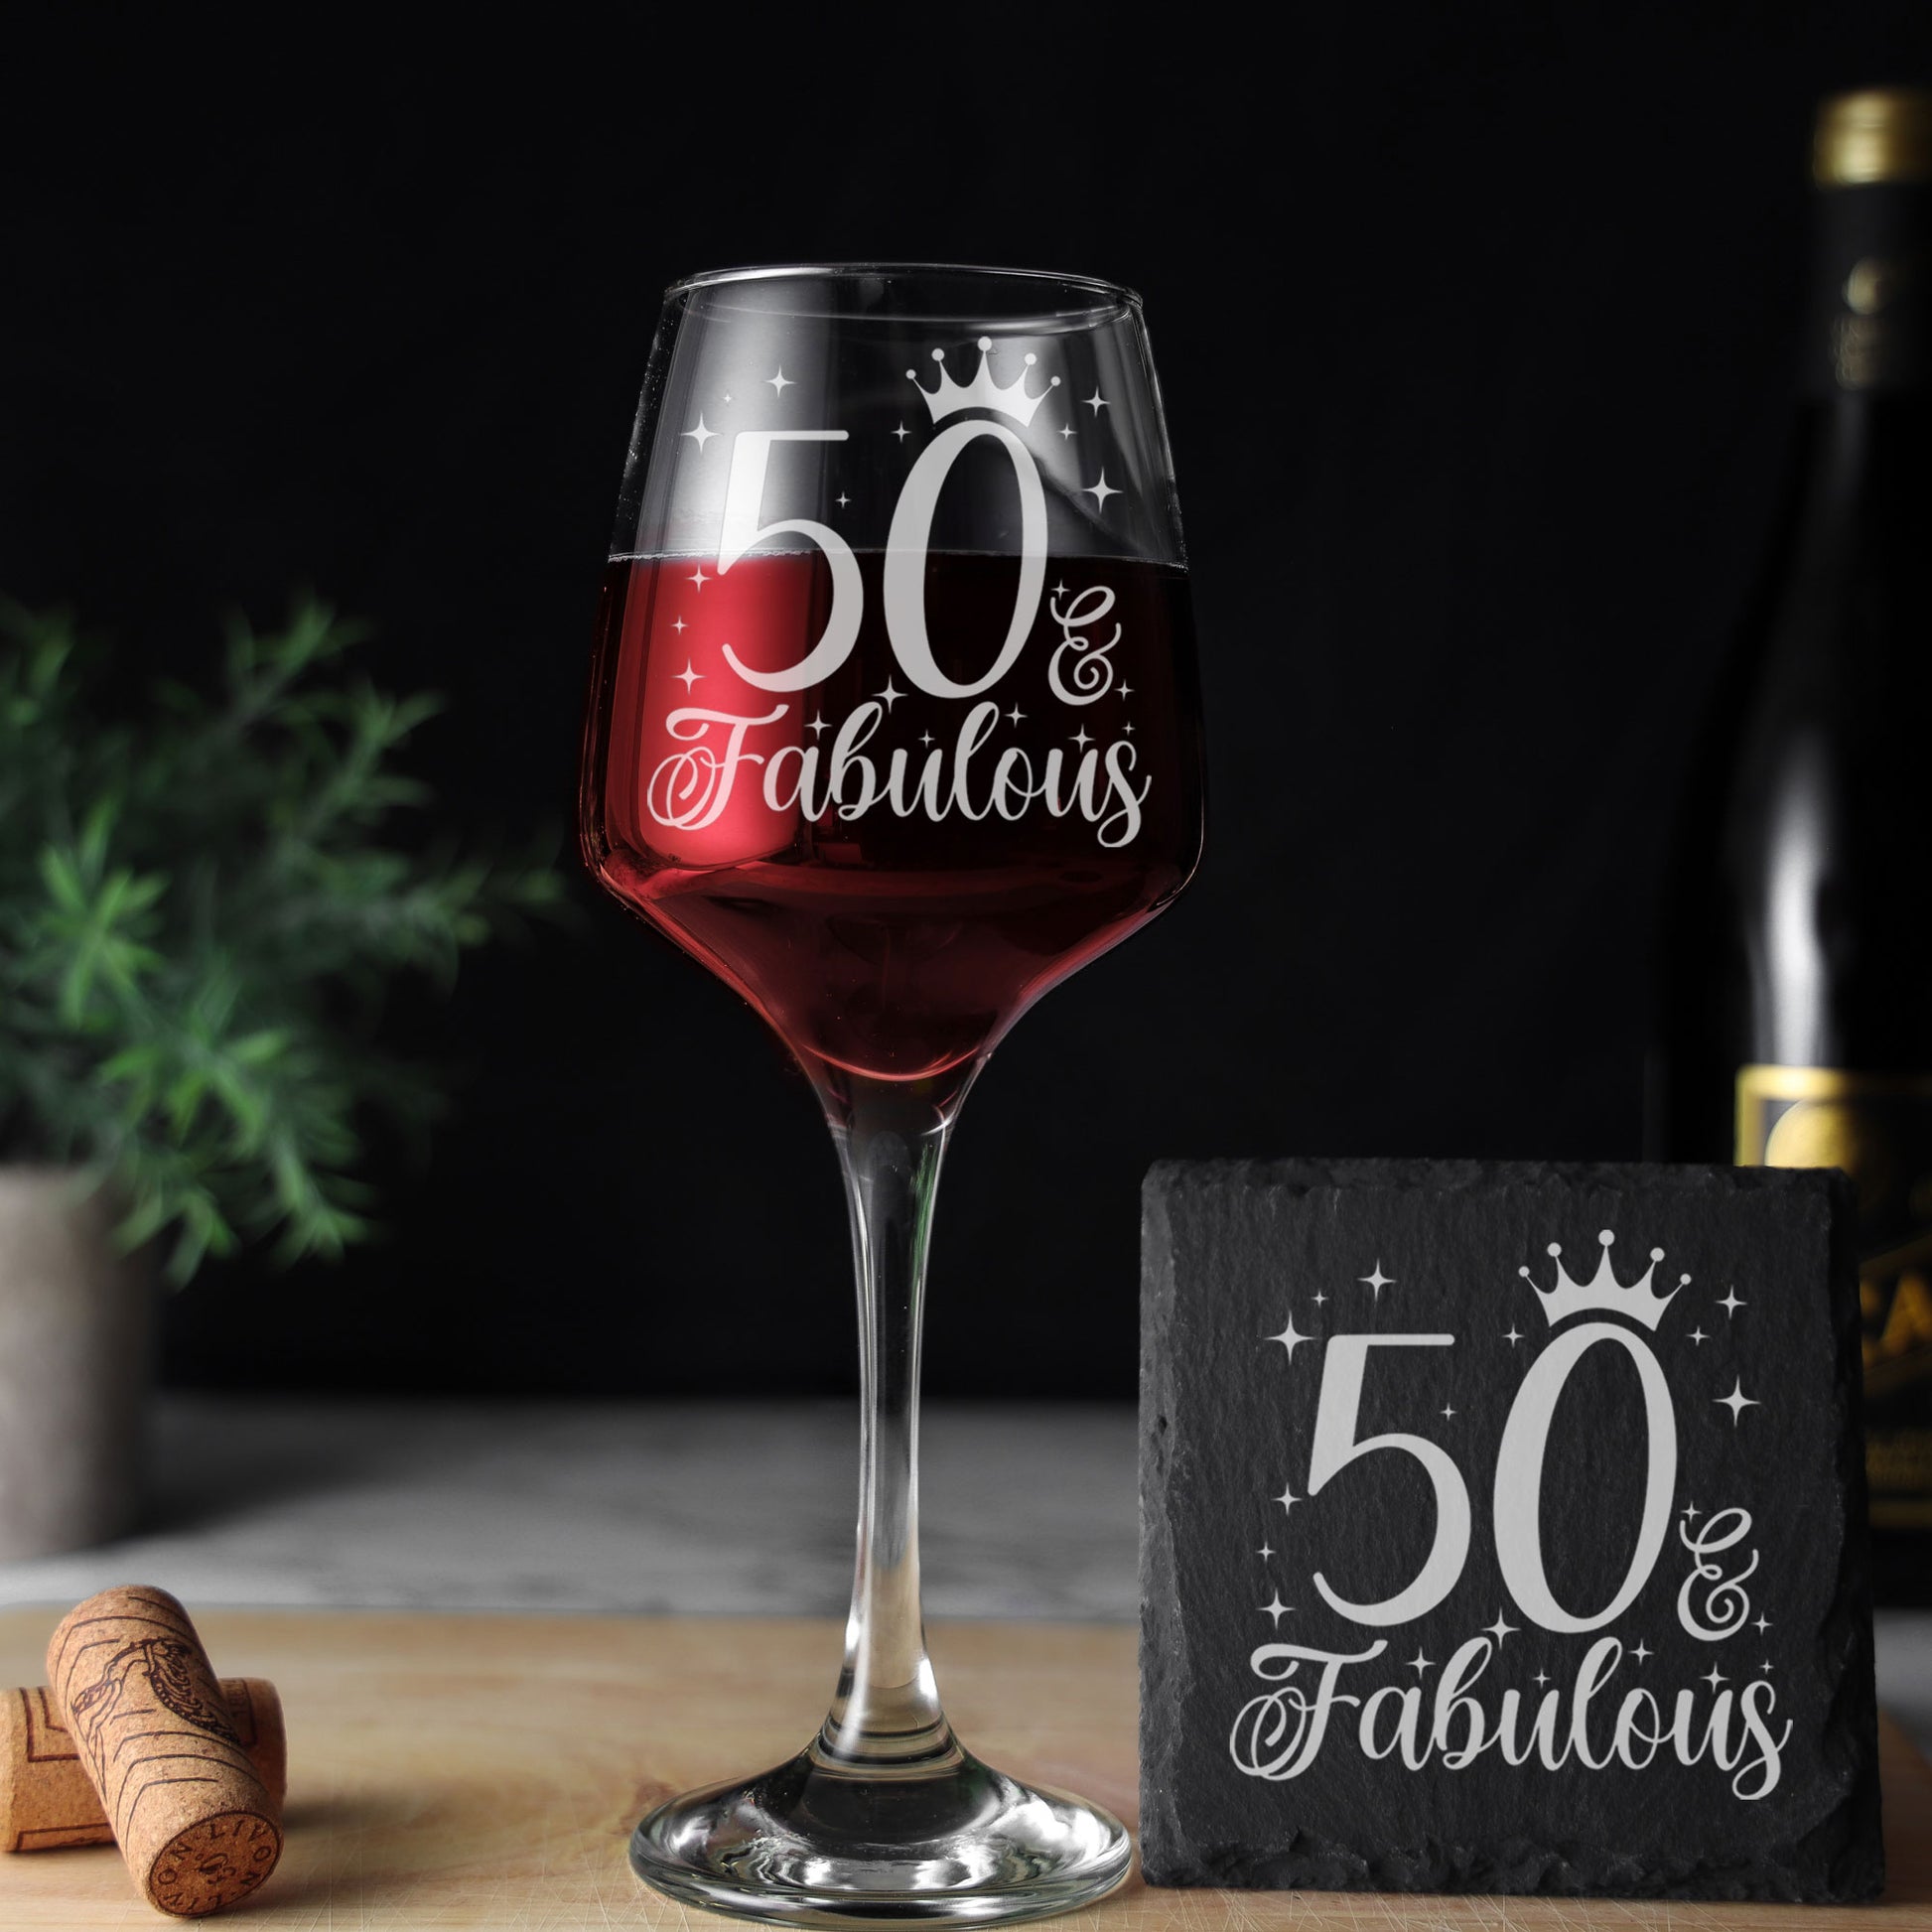 50 & Fabulous 50th Birthday Gift Engraved Wine Glass and/or Coaster Set  - Always Looking Good - Glass & Square Coaster  